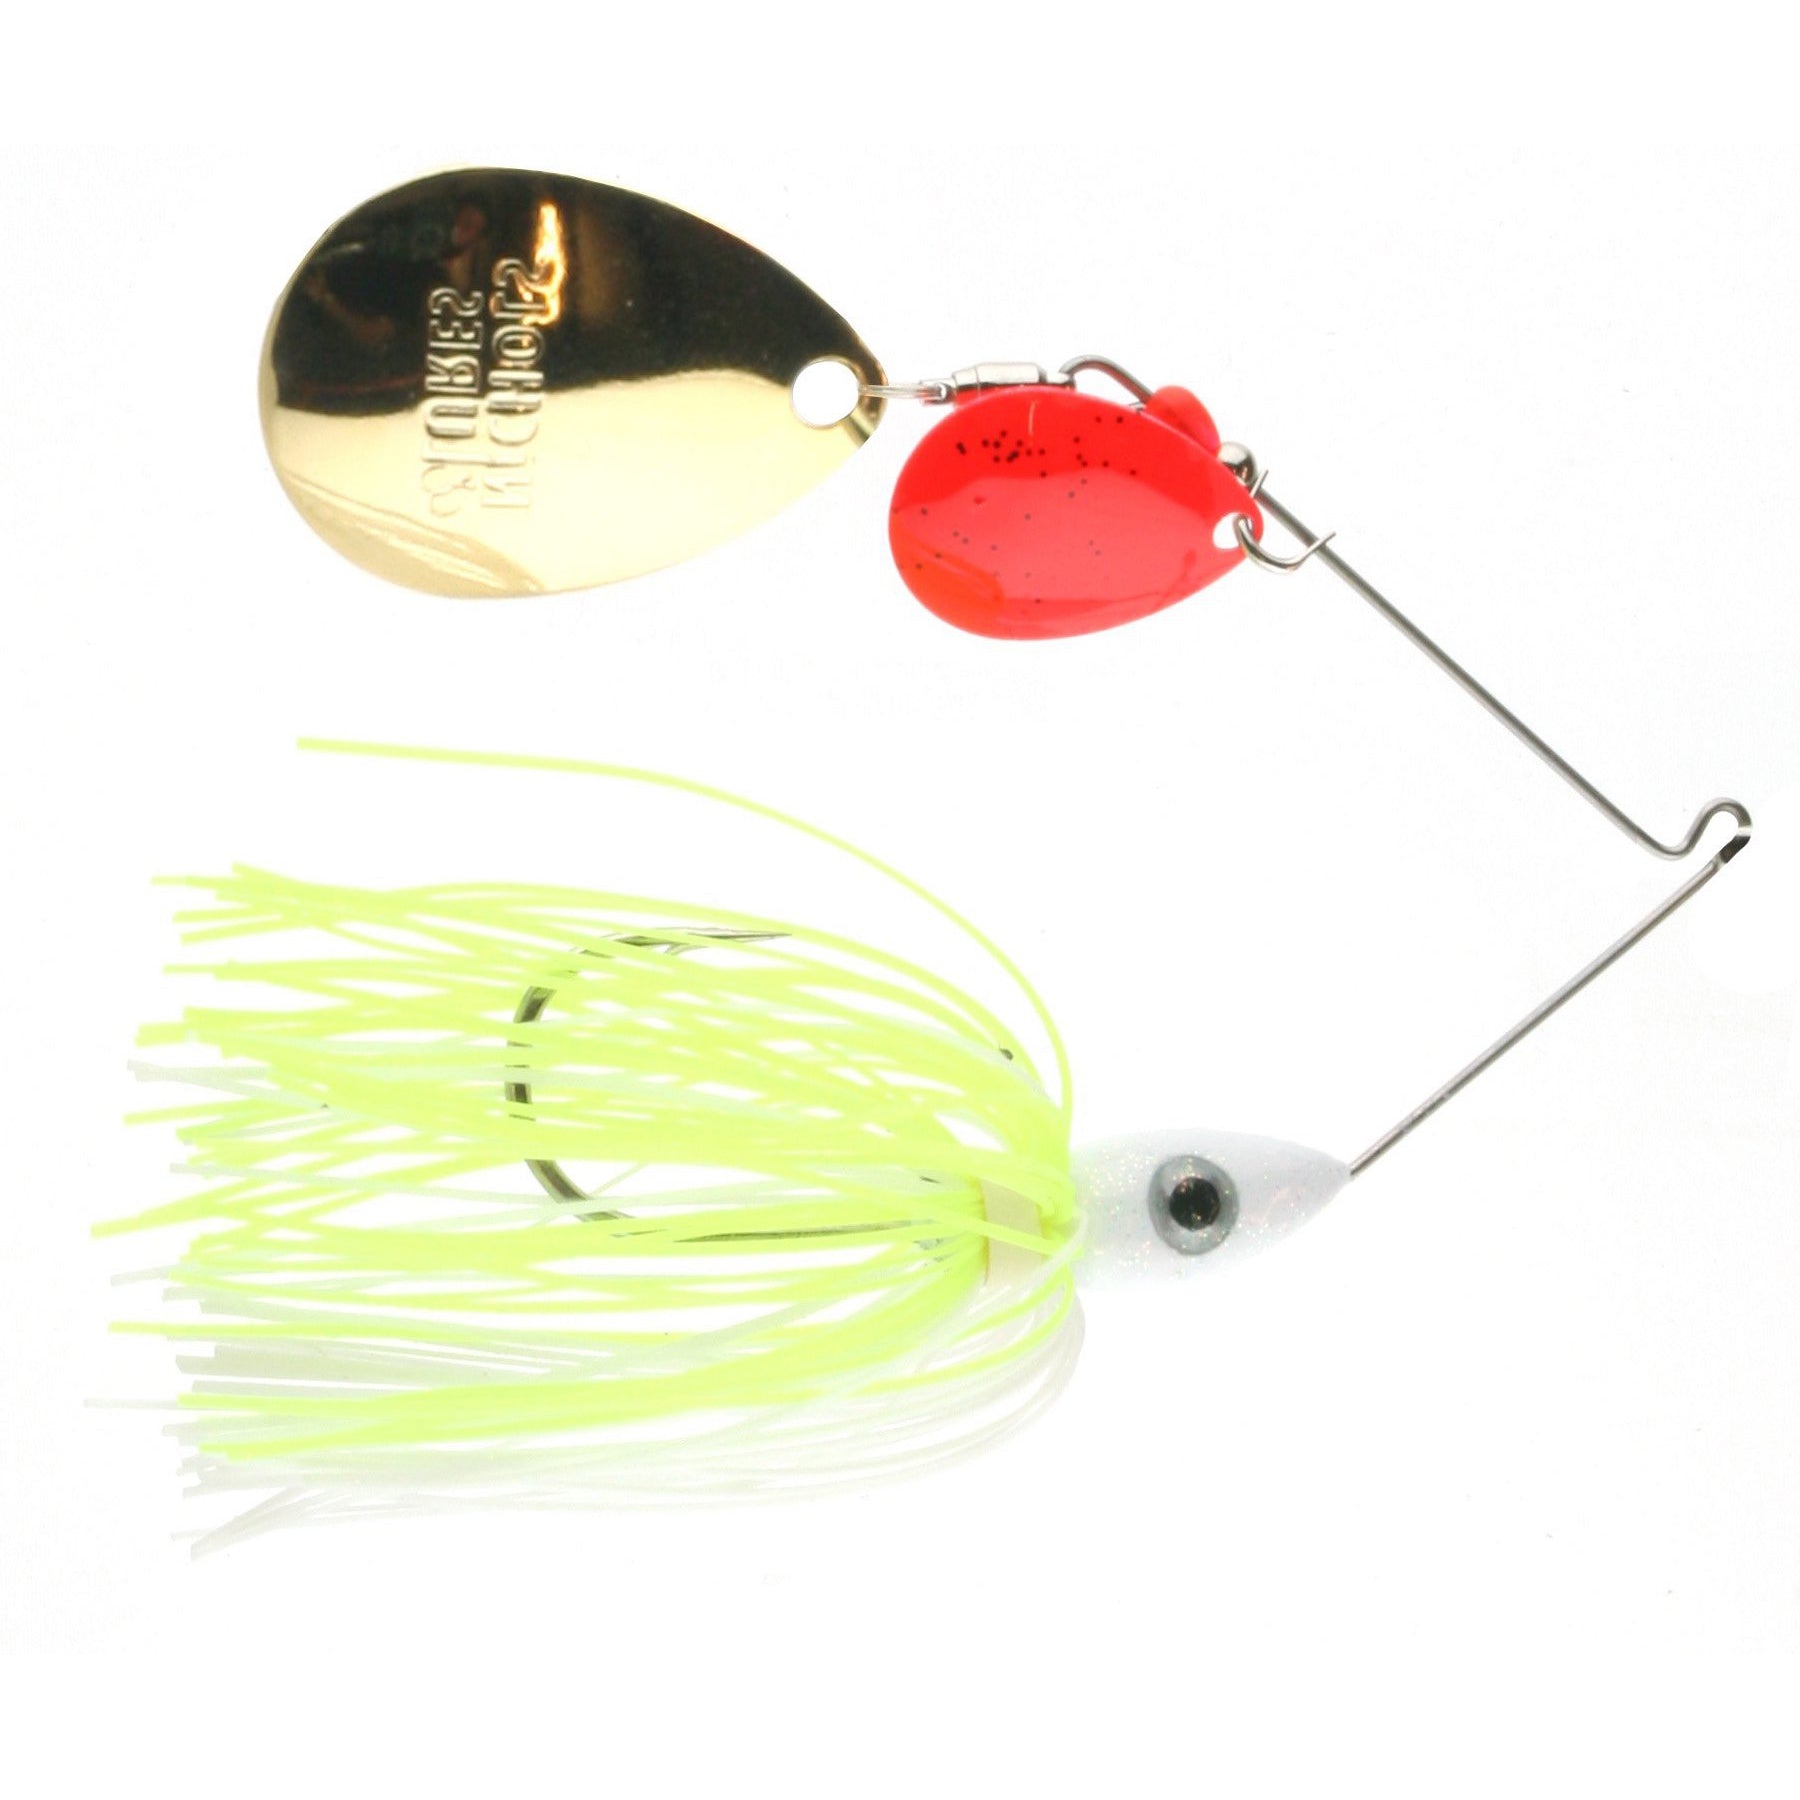 Spinnerbait #13 Nickle Colorado blades, Black and Red Skirt